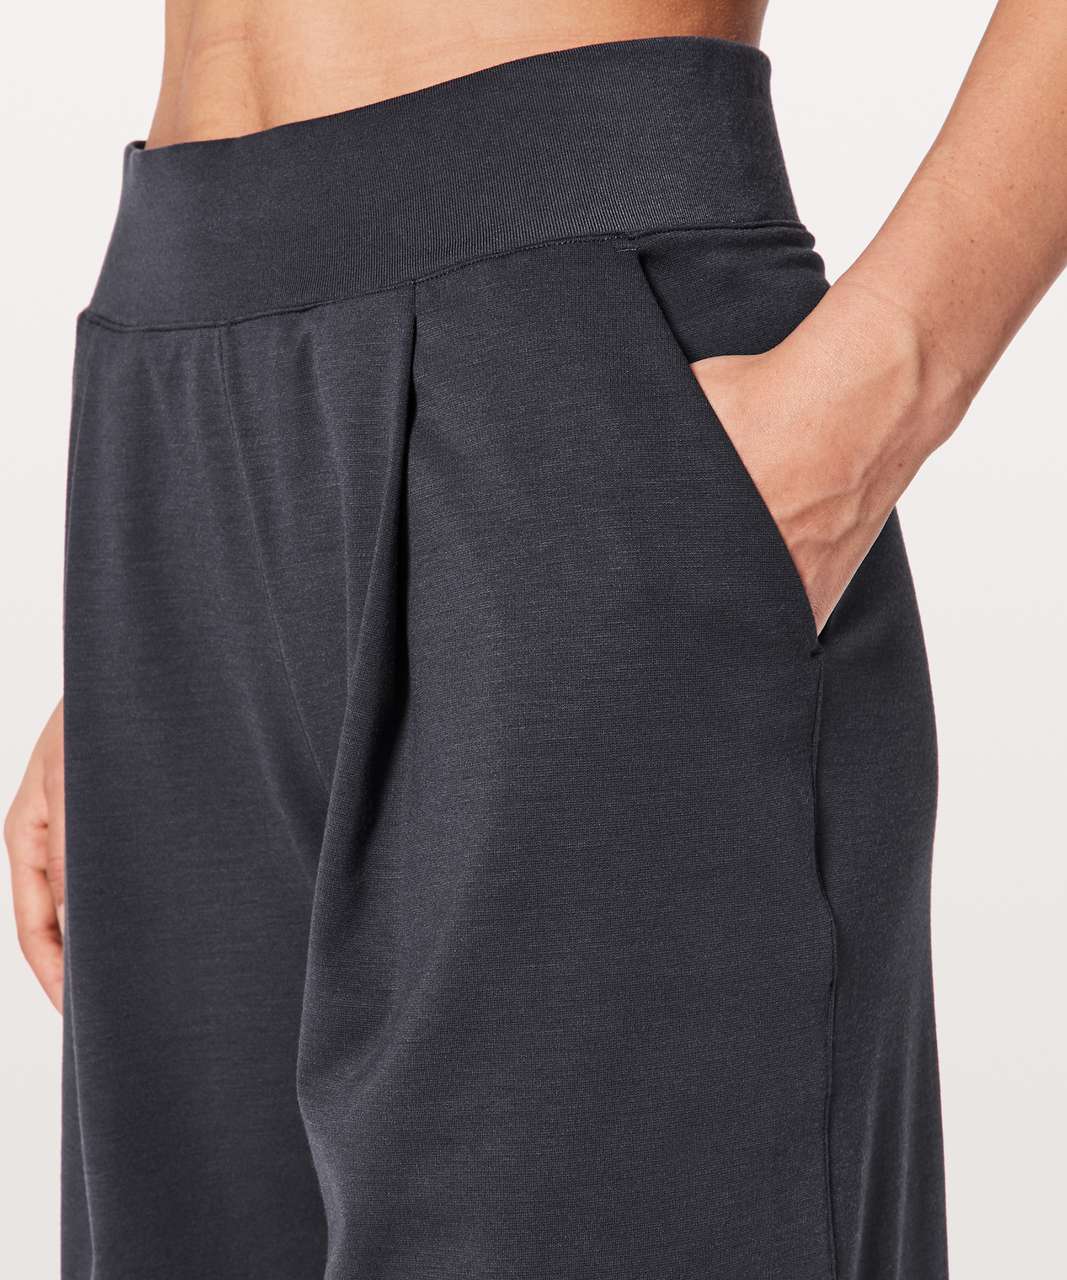 Lululemon Can You Feel The Pleat Crop *21